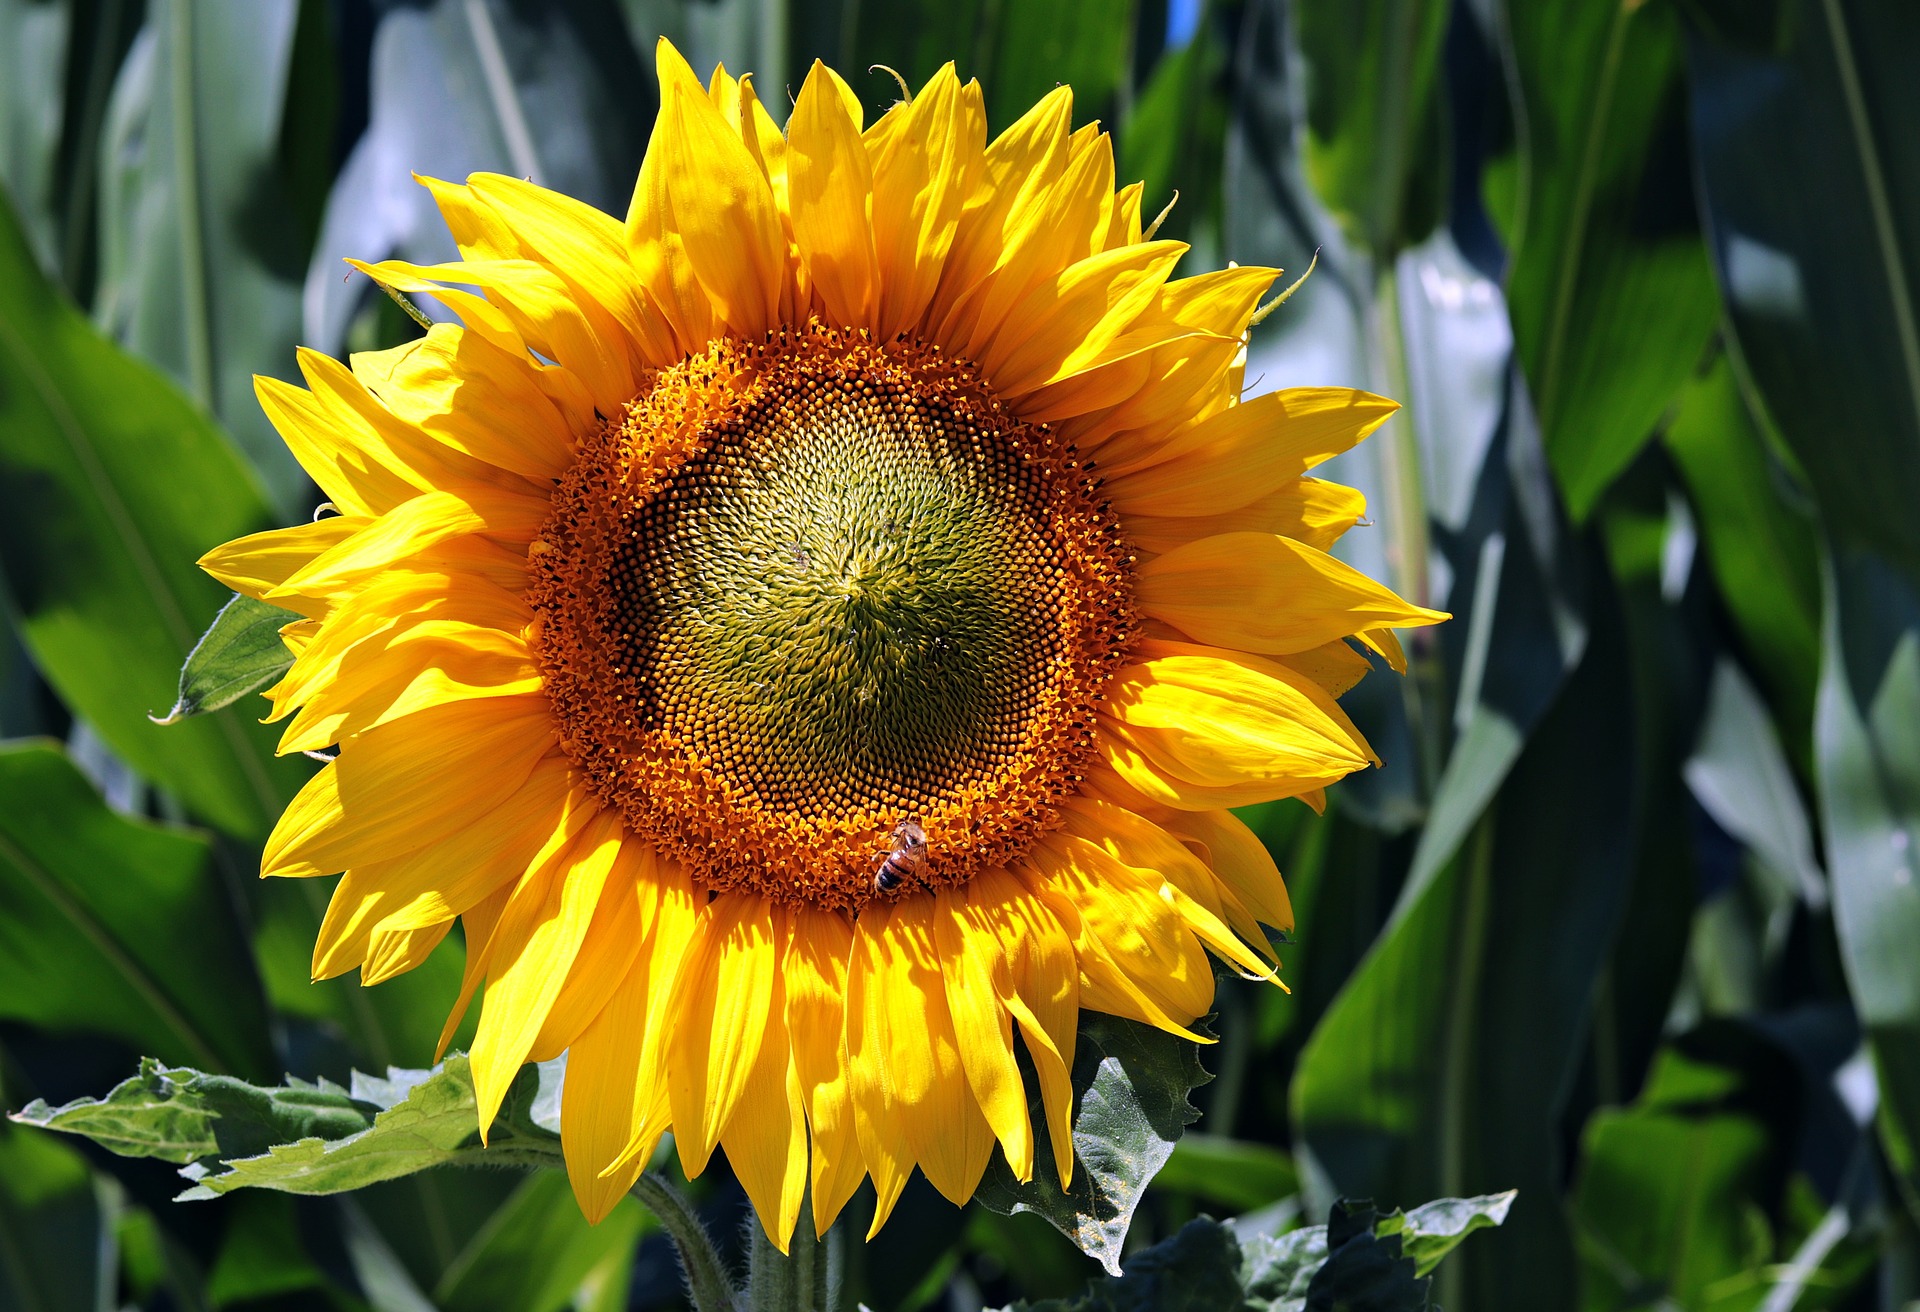 A photo of a bright yellow sunflower facing the camera.